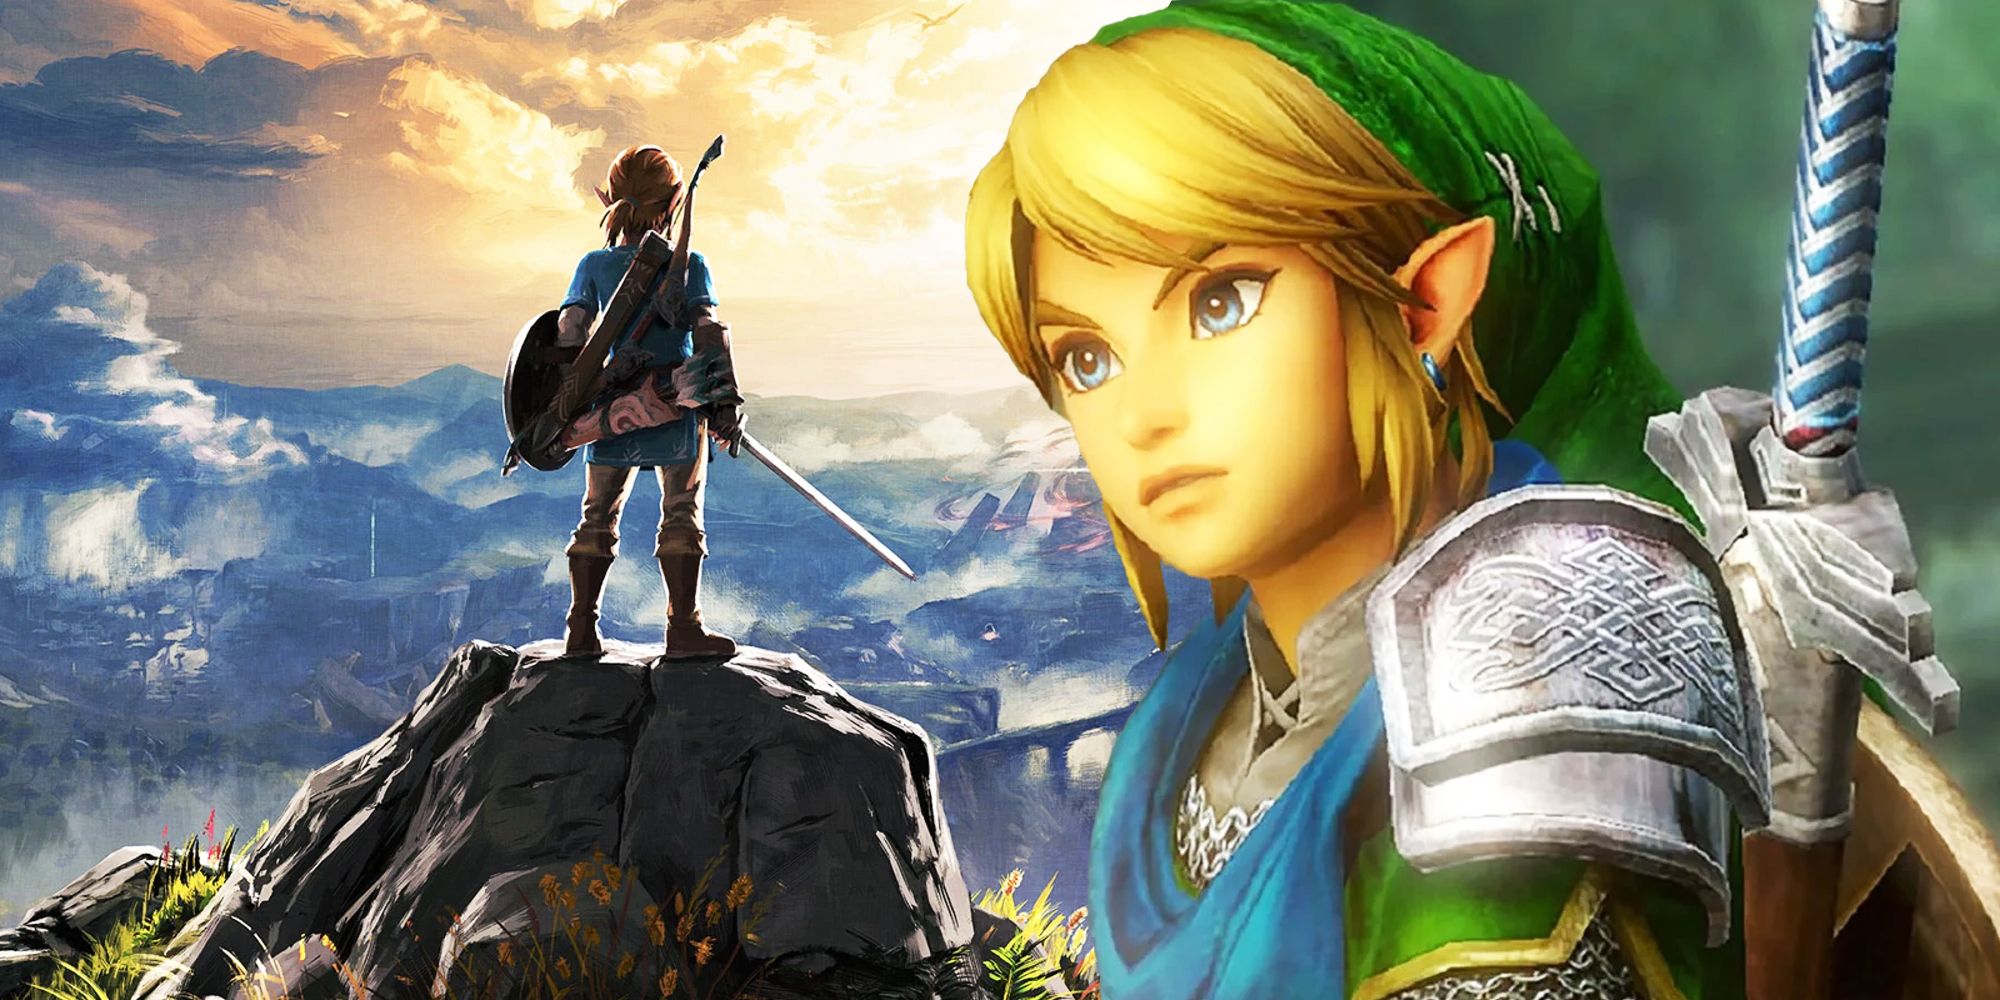 Link (The Legend of Zelda) on X: BREAKING NEWS! @lucastill is Link! Lucas  Till has reportedly been cast as Link in Nintendo's upcoming Legend of Zelda  movie officially said to be adapting